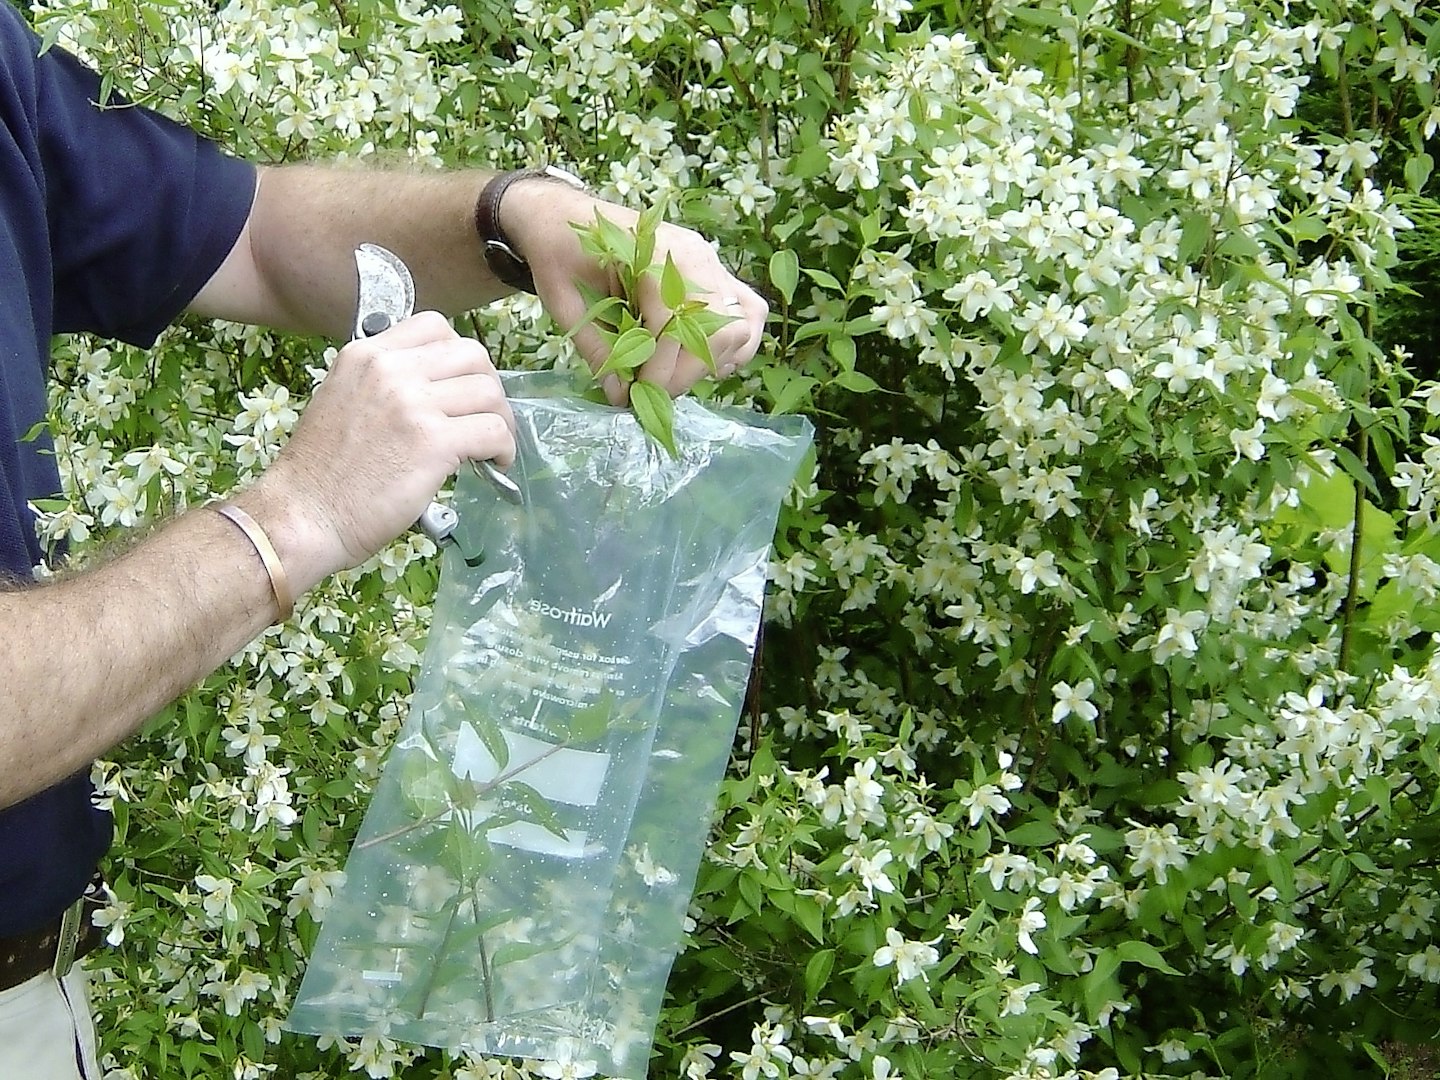 Collect the cuttings in early morning when itu2019s cool and popu00a0them into a damp polythene bag to prevent wilting.